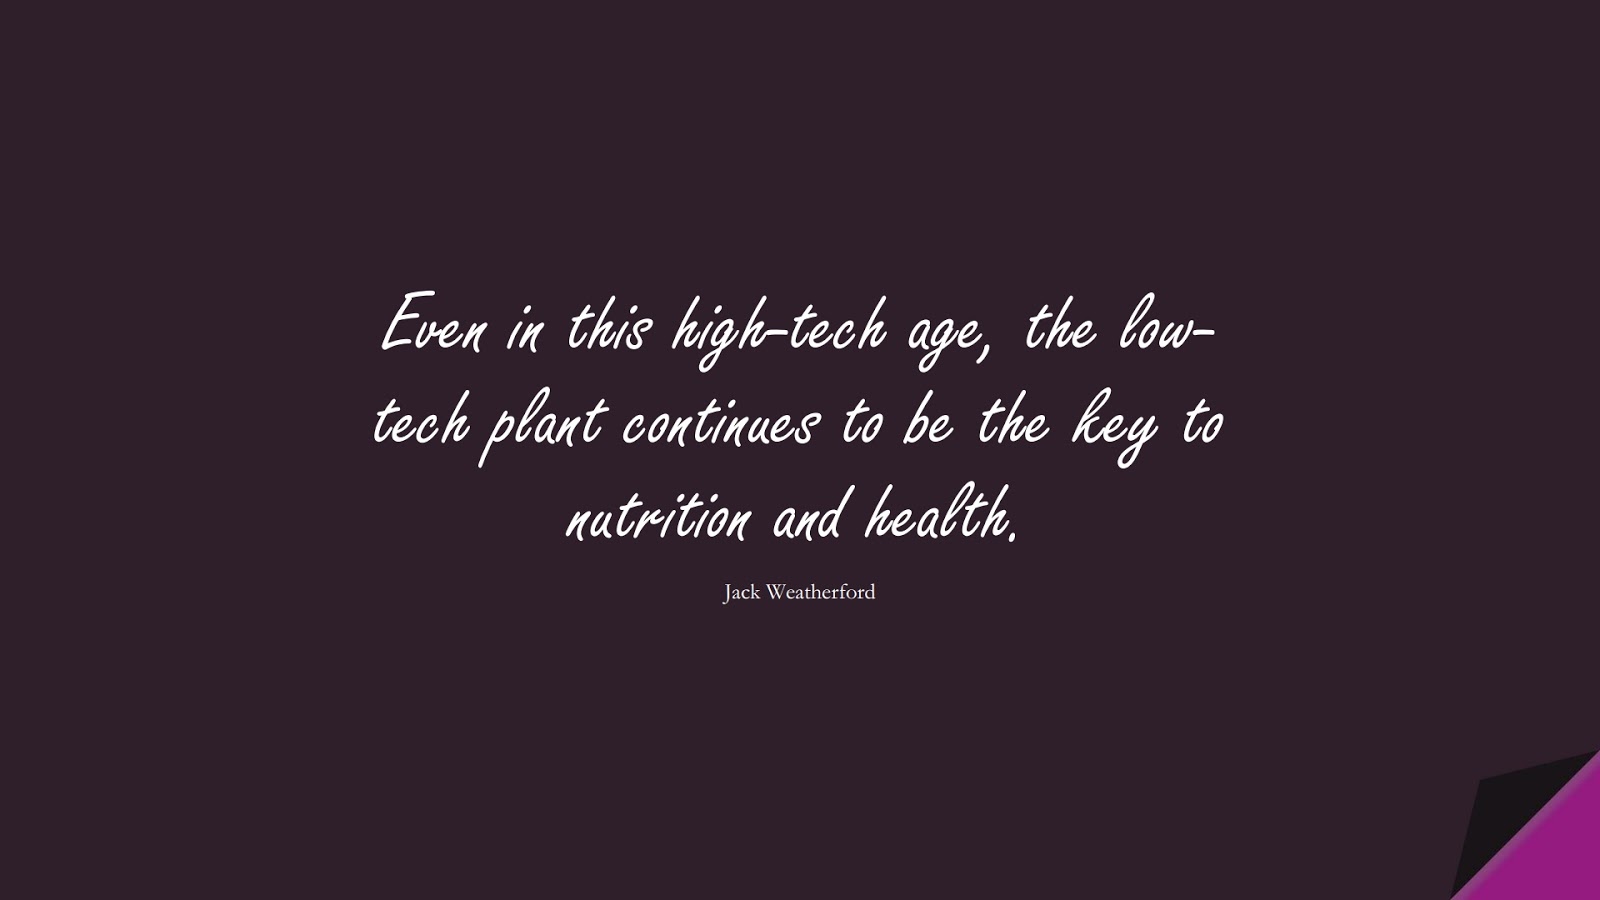 Even in this high-tech age, the low-tech plant continues to be the key to nutrition and health. (Jack Weatherford);  #HealthQuotes